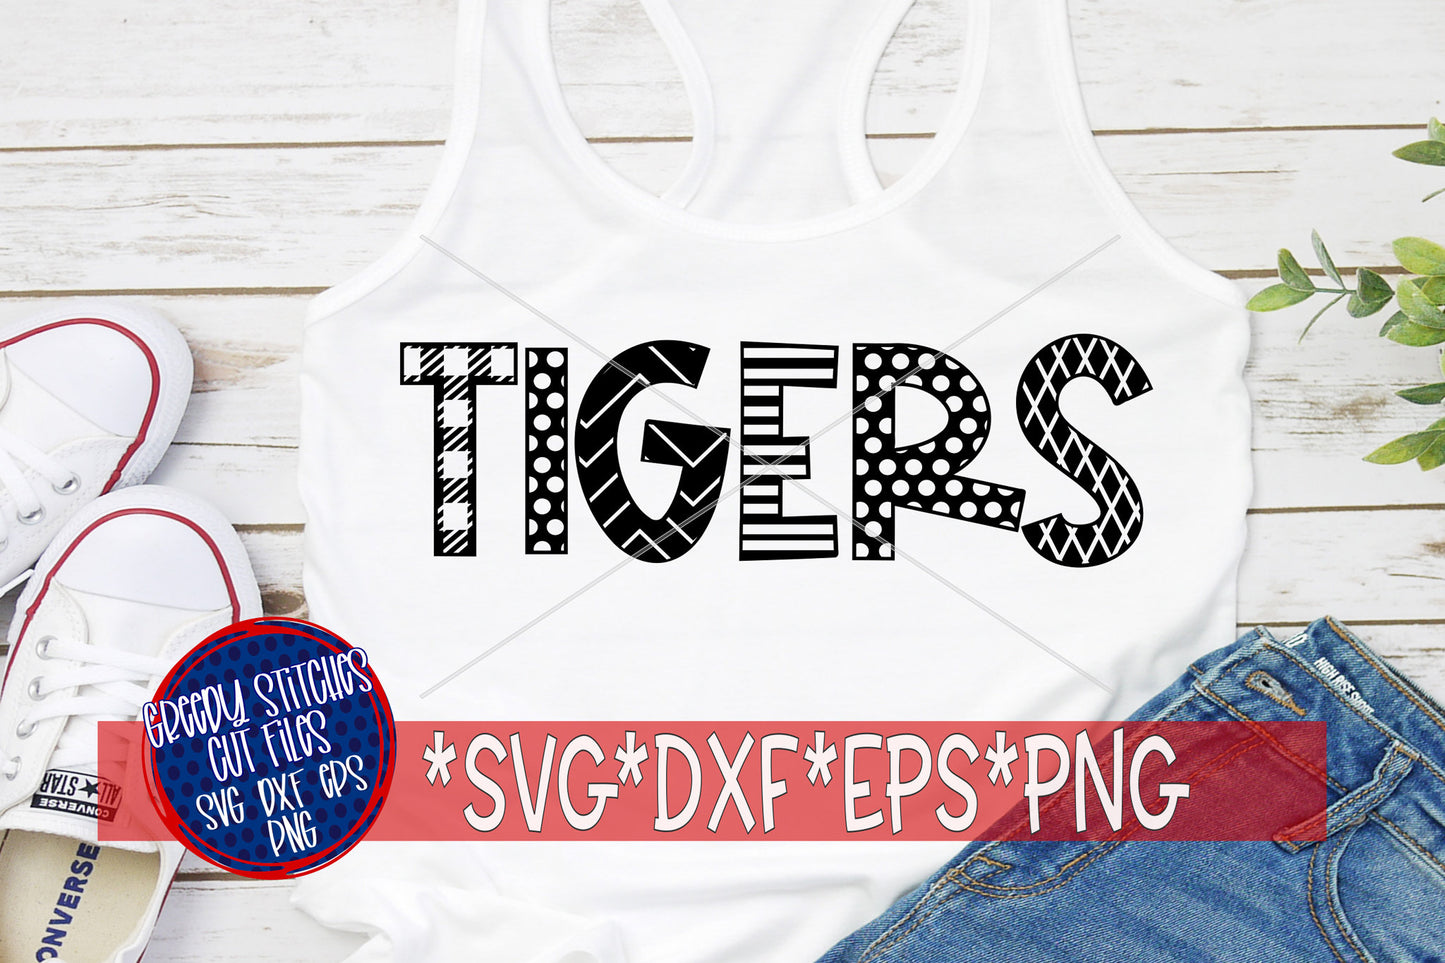 Tigers SvG | Tigers svg dxf eps png. Tigers word art SvG | Tigers DxF | Tigers word art EpS | Tigers SvG | Instant Download Cut File